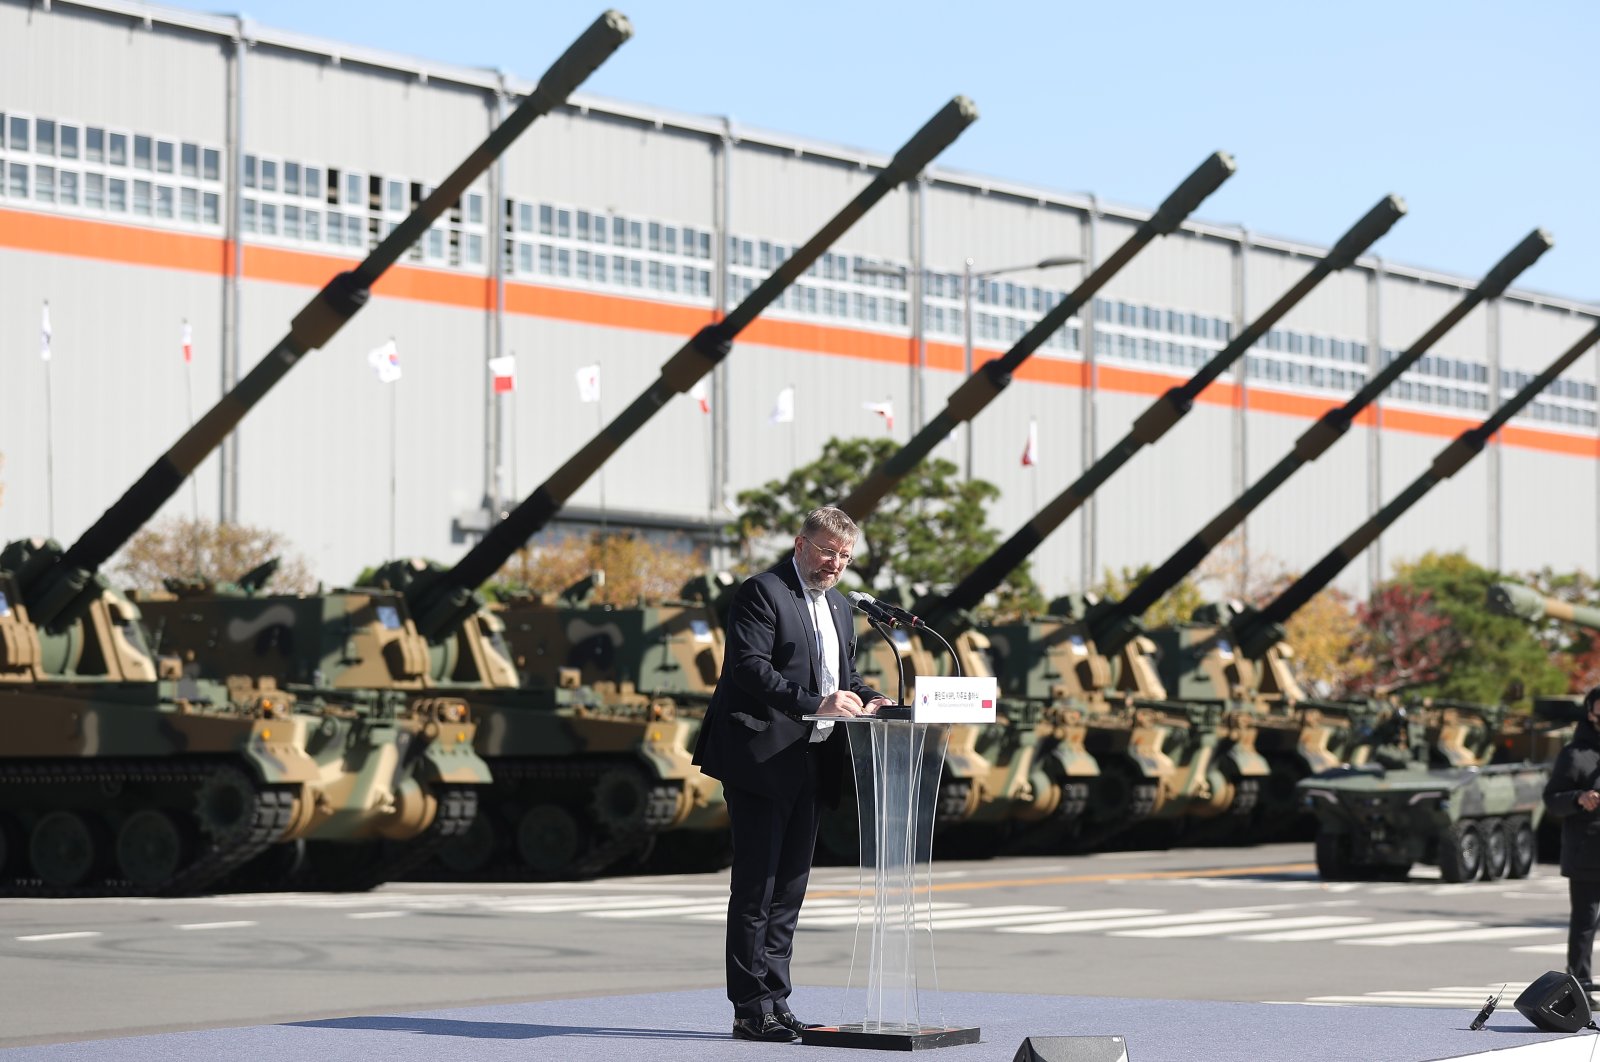 Polish Ambassador to South Korea Piotr Ostaszewski delivers a congratulatory speech during a ceremony to roll out the first K9 self-propelled howitzer to be exported to Poland at Hanwha Defense Co. in Changwon, 301 kilometers southeast of Seoul, South Korea, Oct. 19, 2022. (EPA Photo)